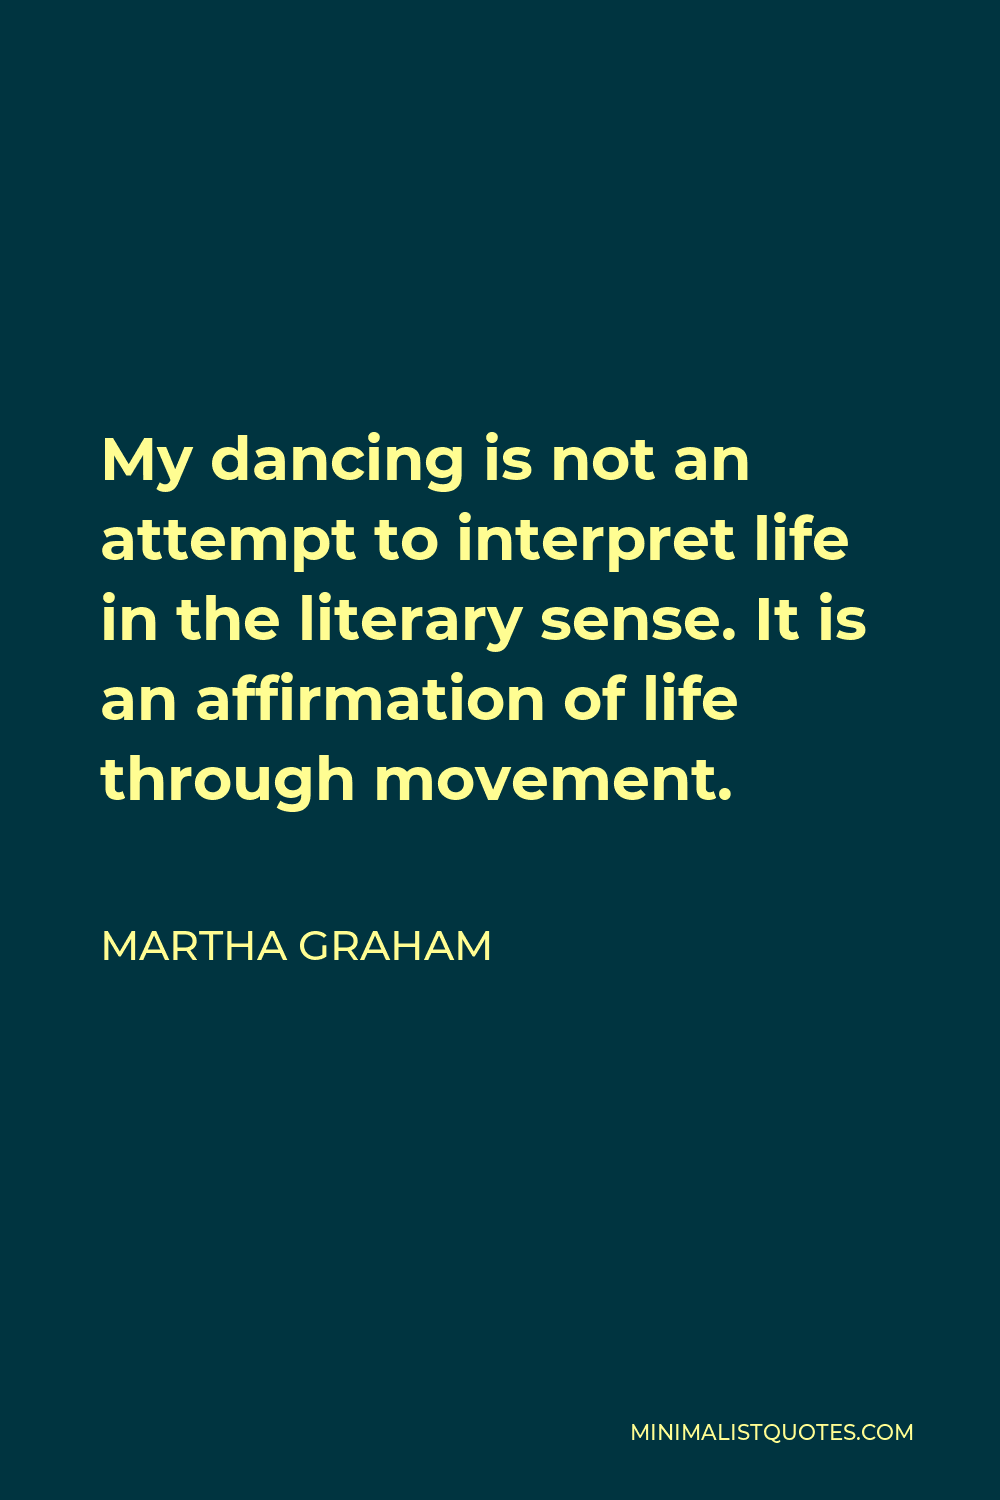 Martha Graham Quote - My dancing is not an attempt to interpret life in the literary sense. It is an affirmation of life through movement.